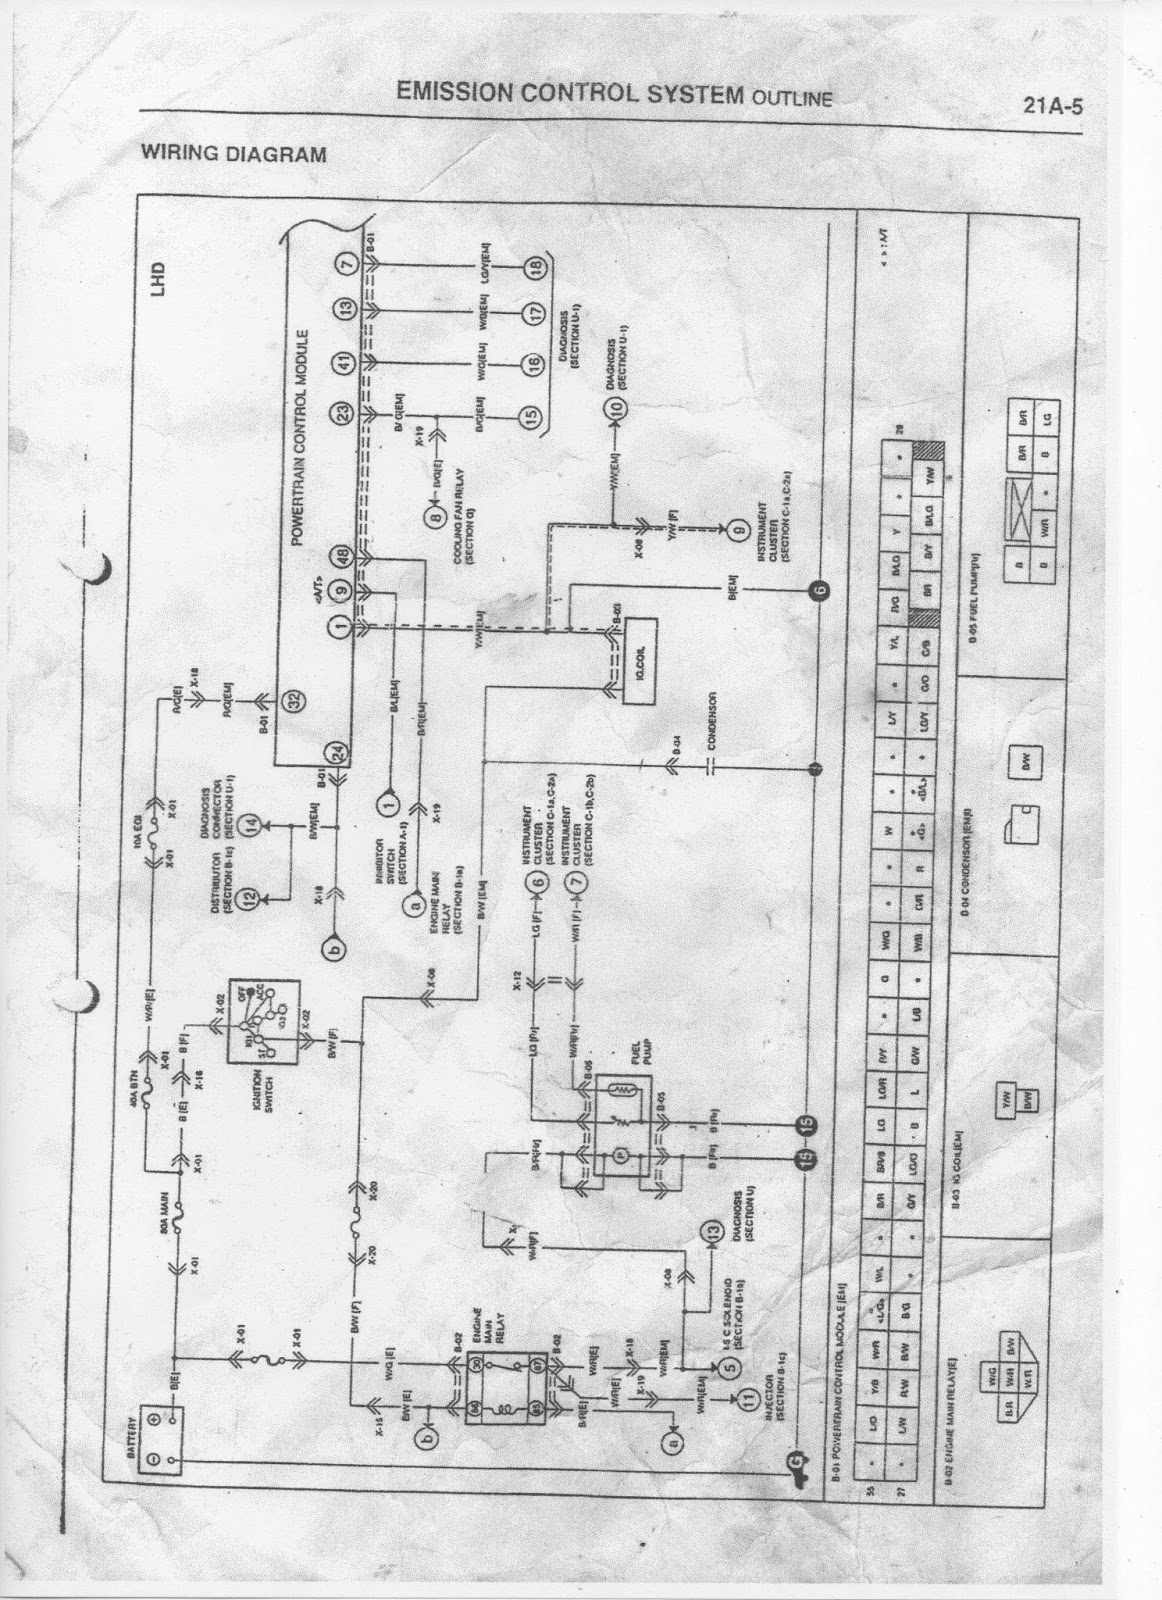 Ford New Holland Wiring Diagram